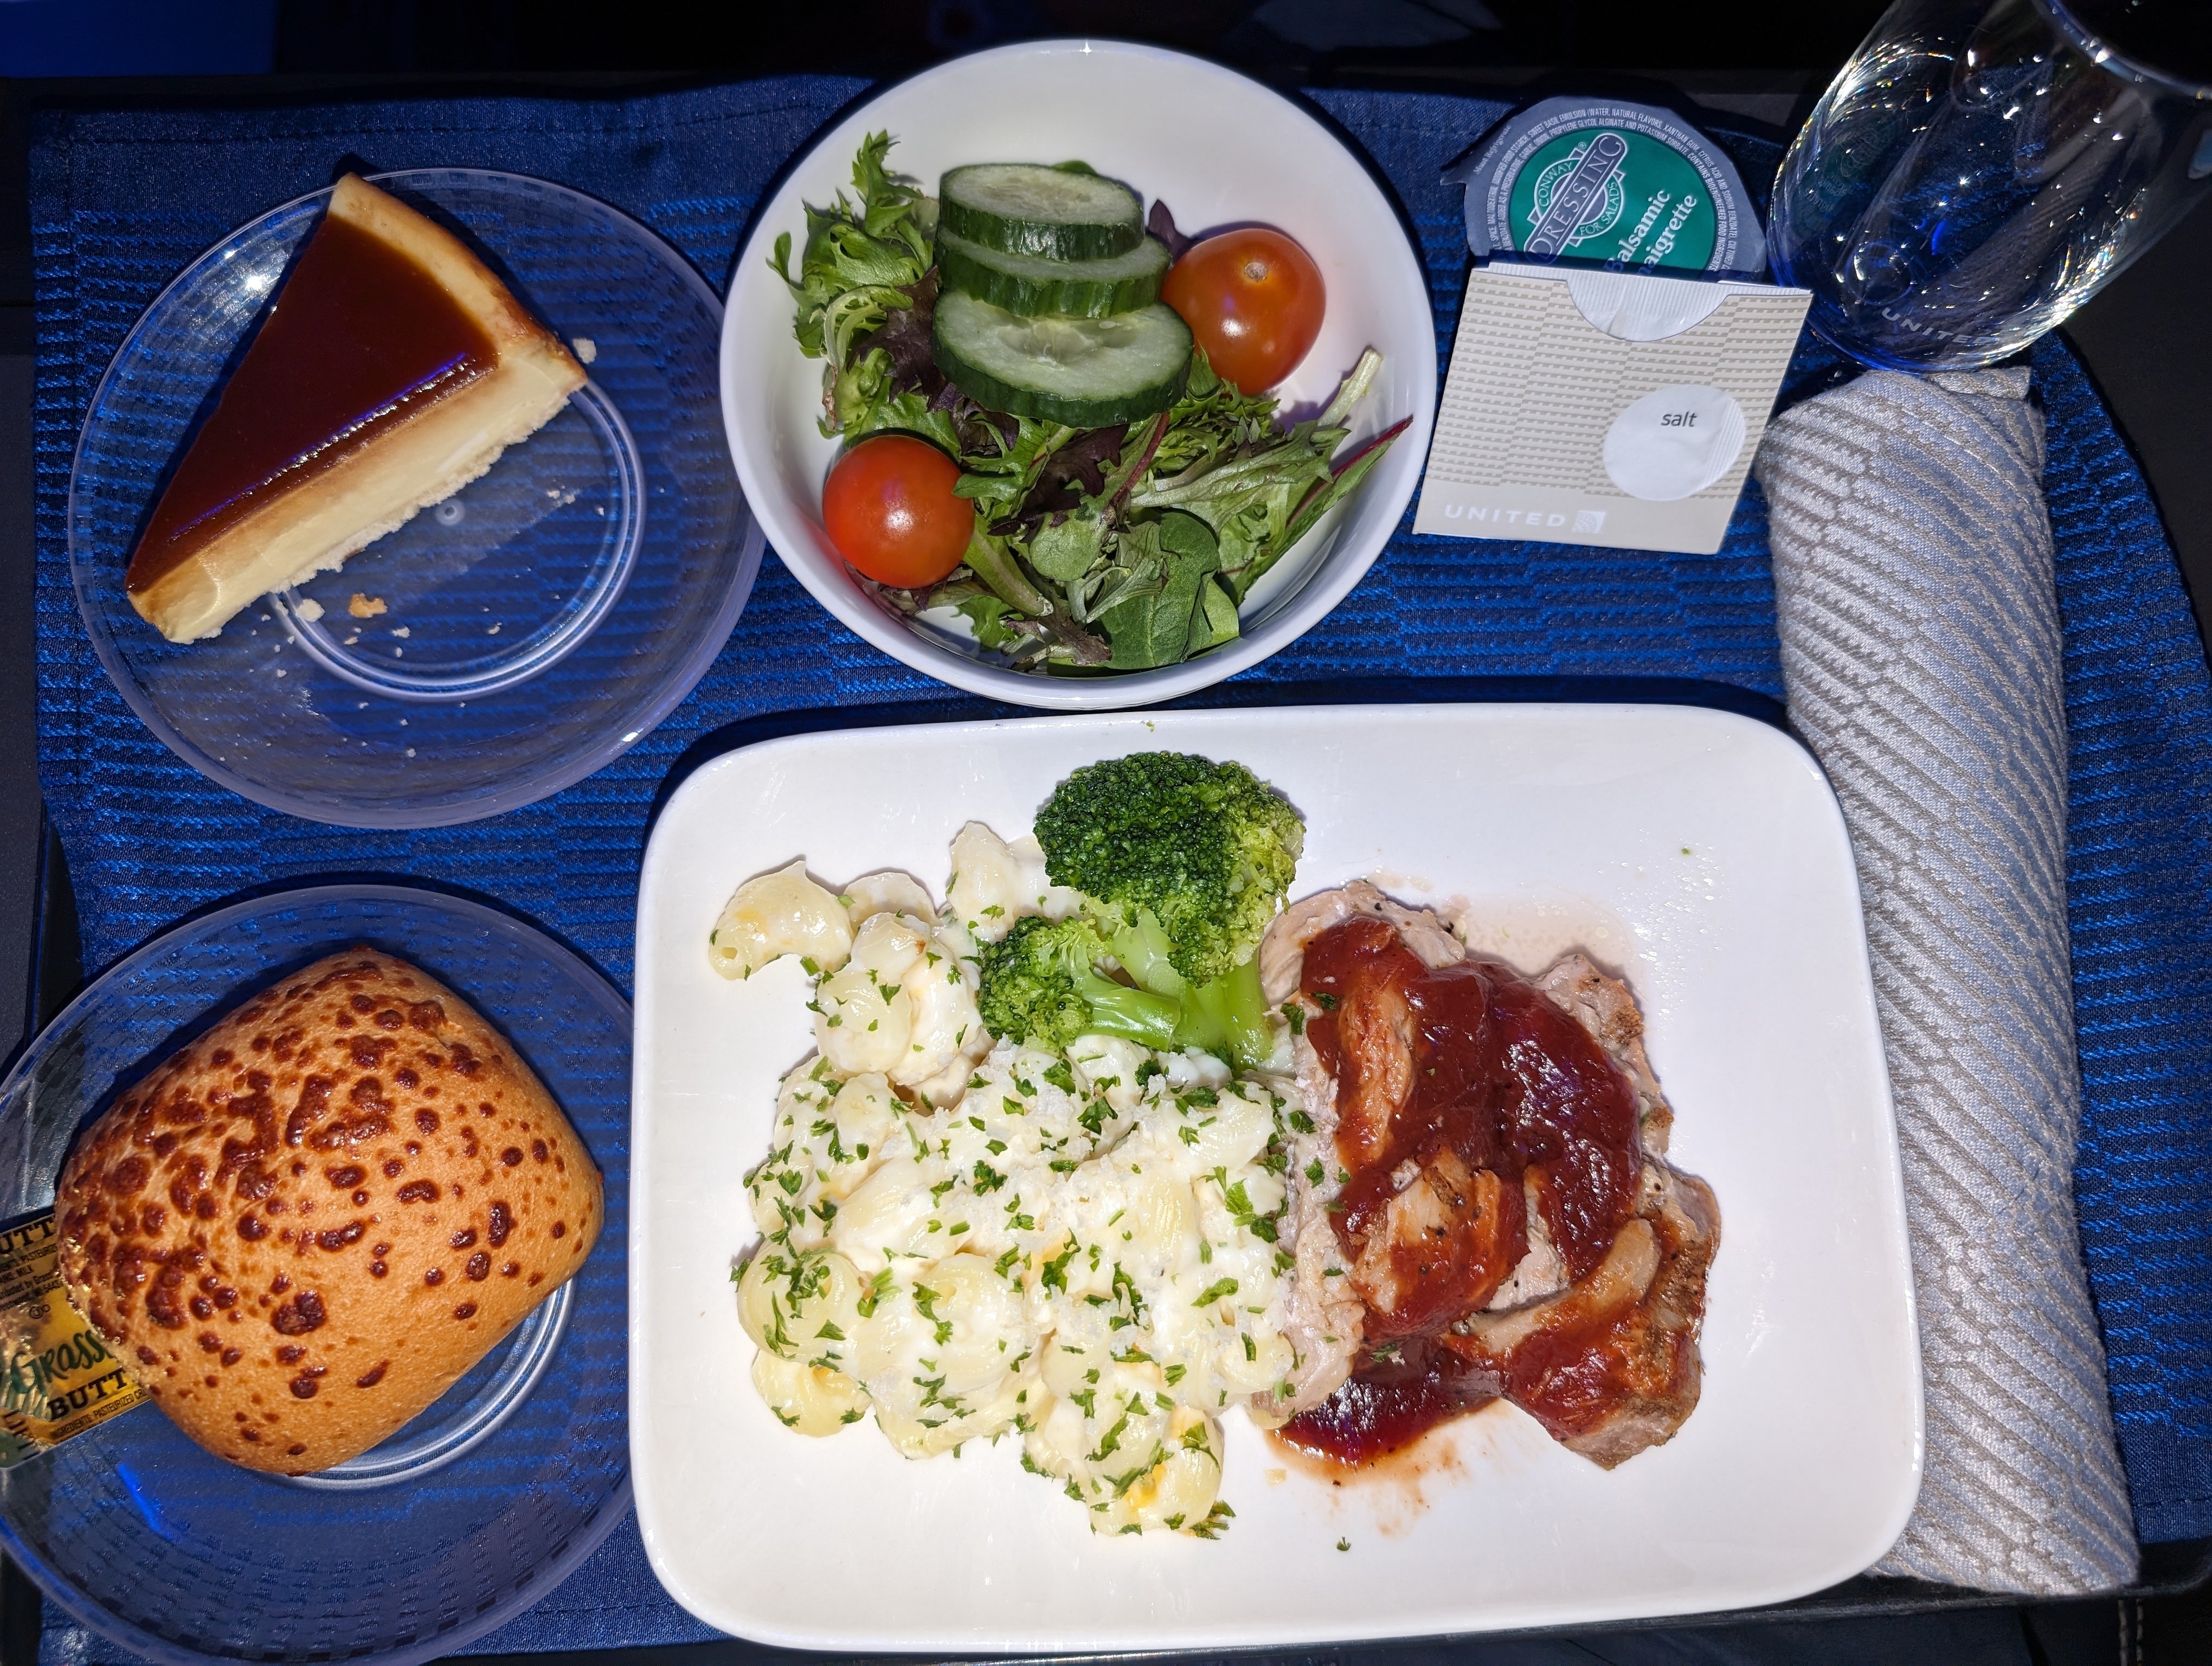 Photo of a tray of food taken on a domestic US United flight. The main entree on the tray is a dish with bbq chicken thighs and macaroni. A salad, roll, and piece of cheesecake are also present.